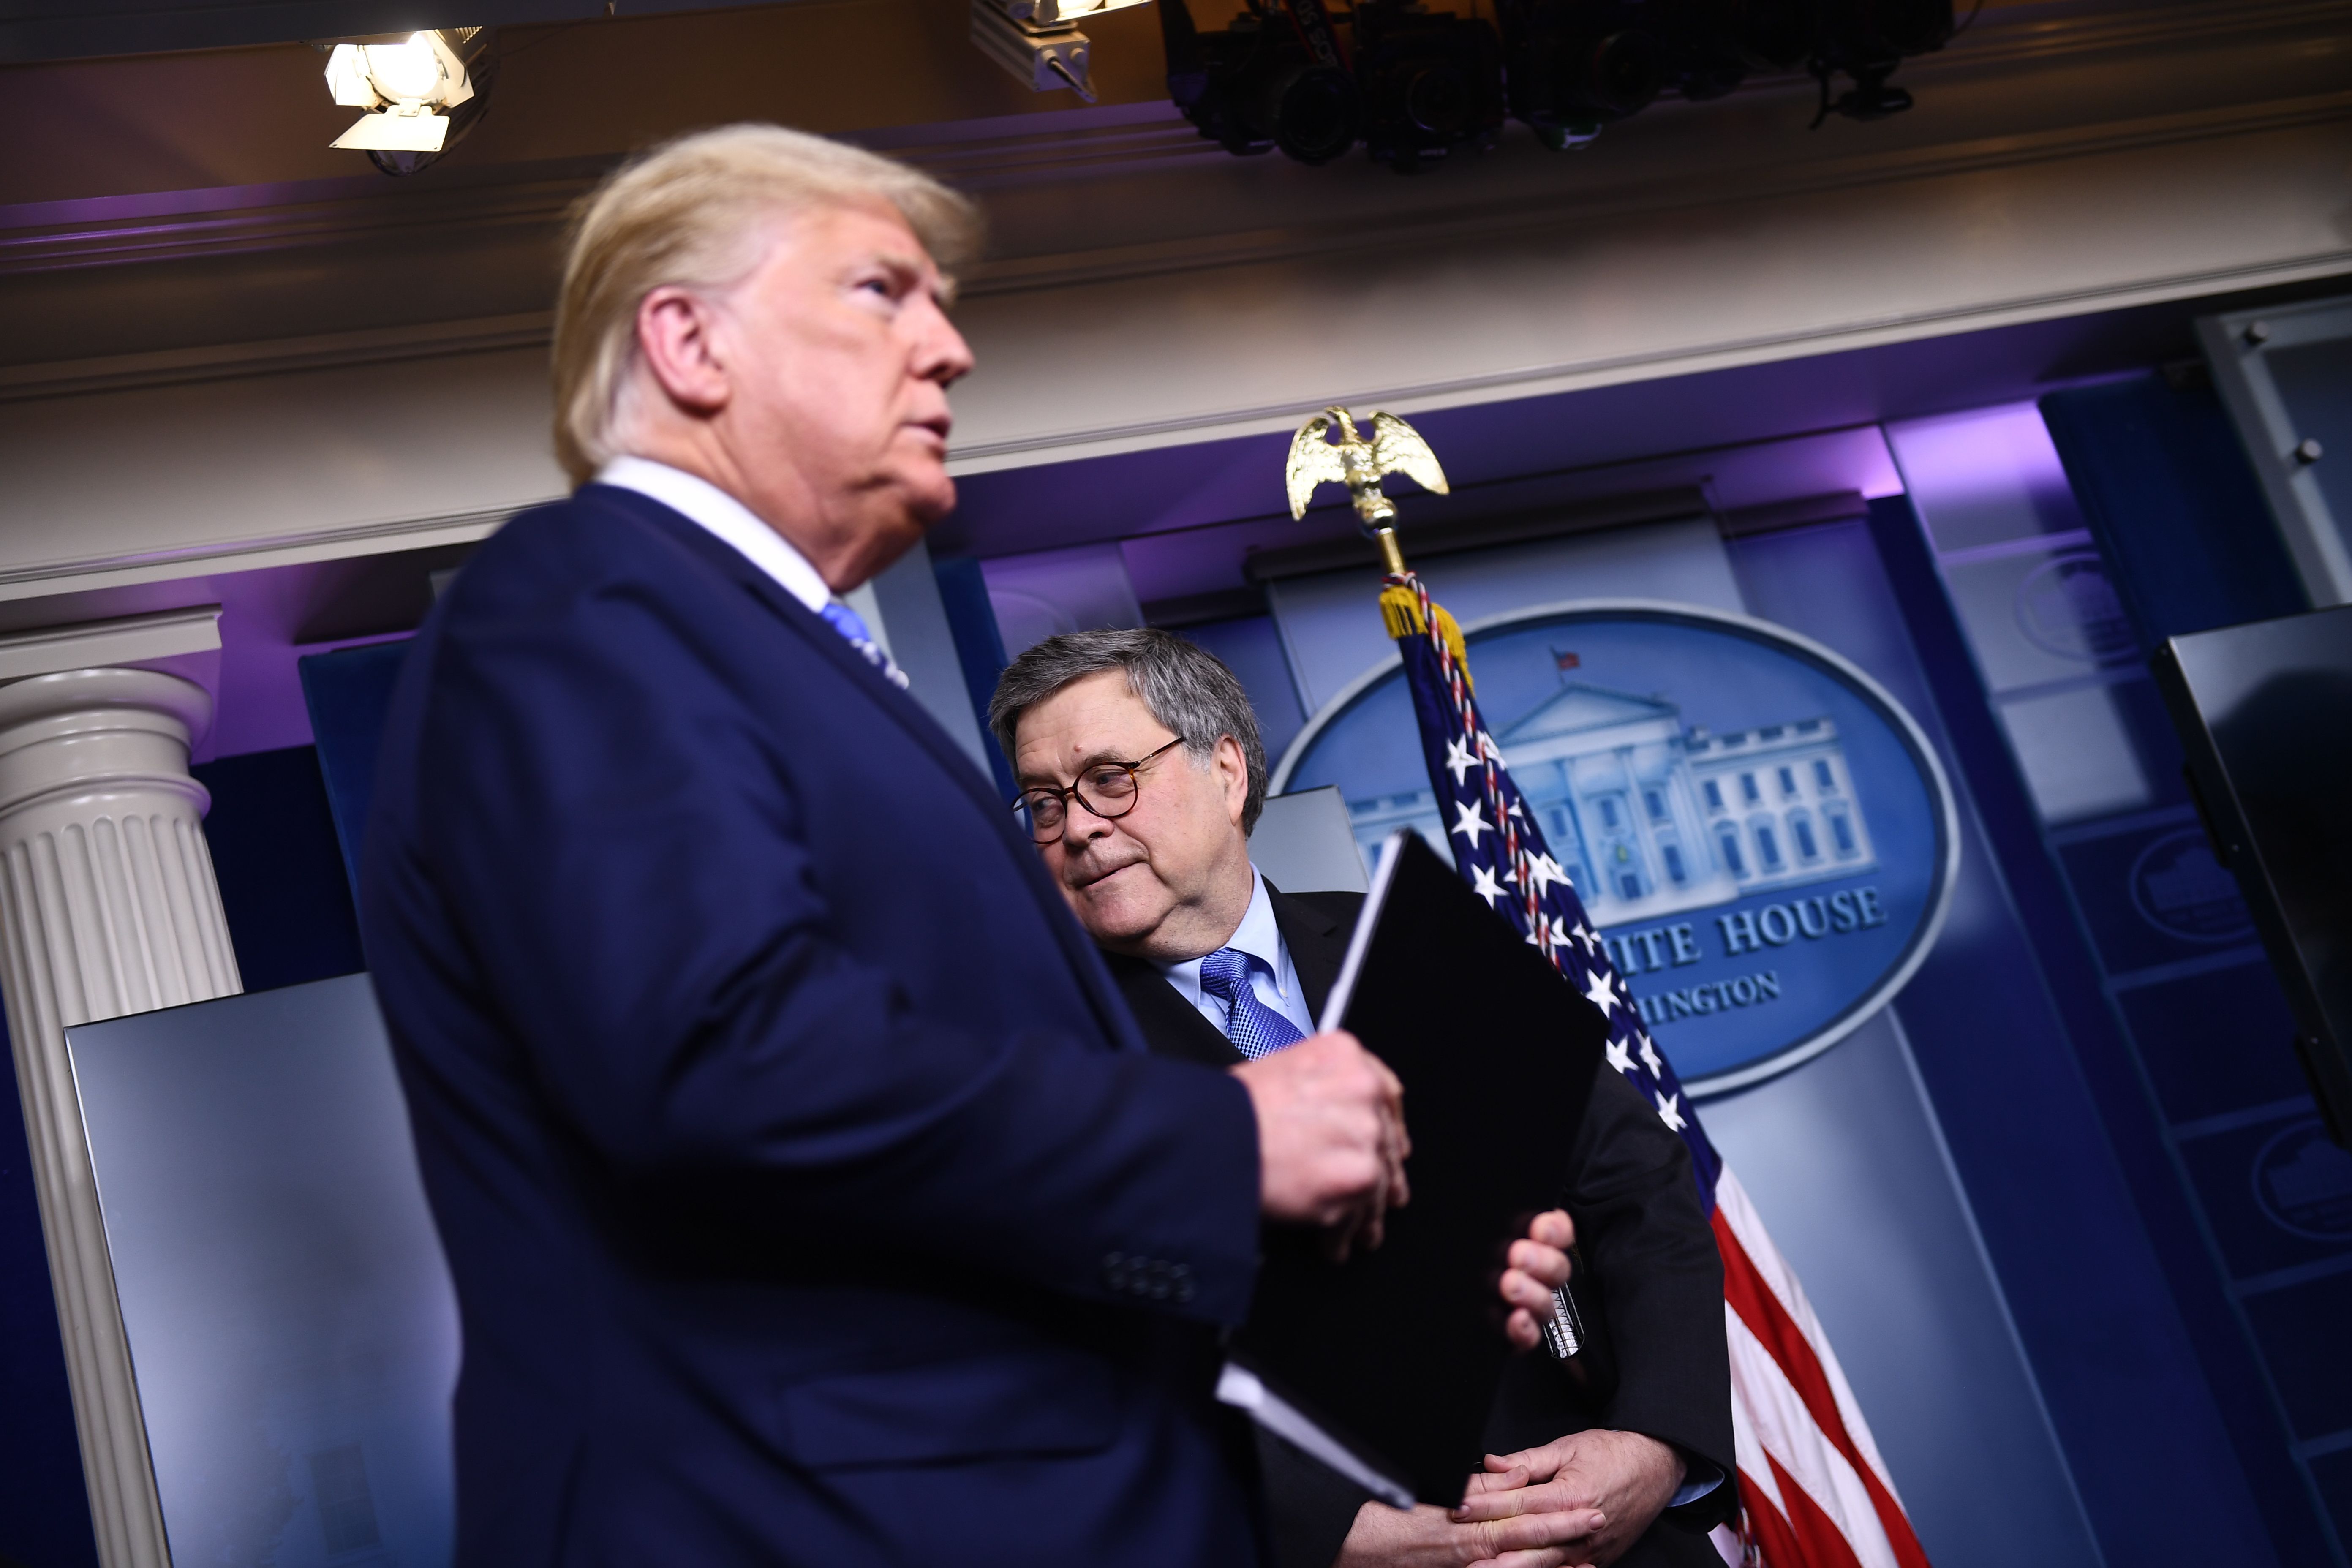 US President Donald Trump arrives as Attorney General William Barr looks on during the daily briefing on the novel coronavirus, COVID-19, at the White House on March 23, 2020, in Washington, DC. (Photo by BRENDAN SMIALOWSKI/AFP via Getty Images)